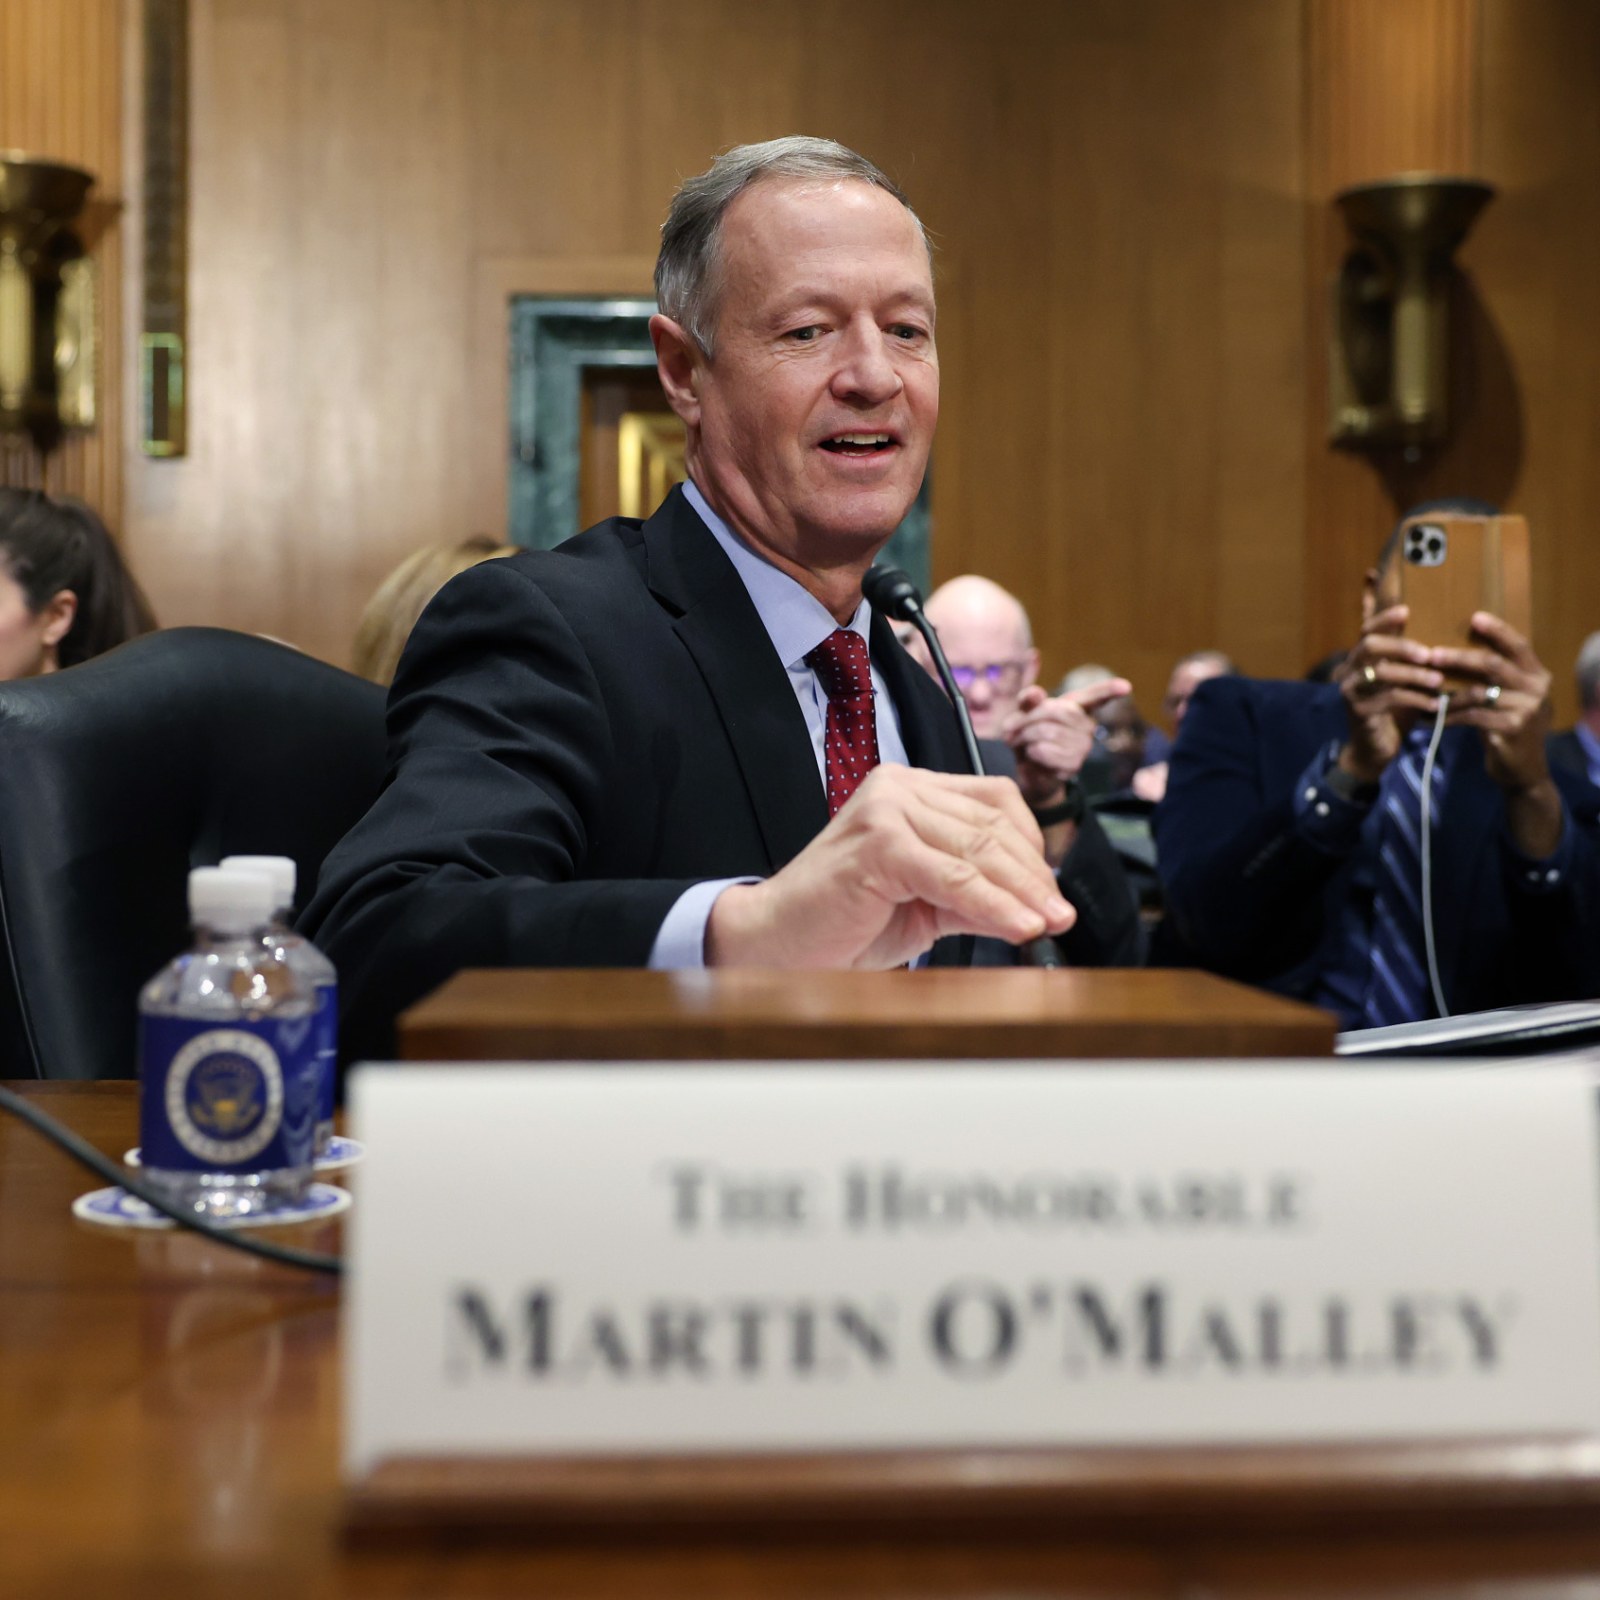 A Big Change for Your Grandma: No More Social Security Payment Nightmares, Thanks to Martin O'Malley's Bold Move